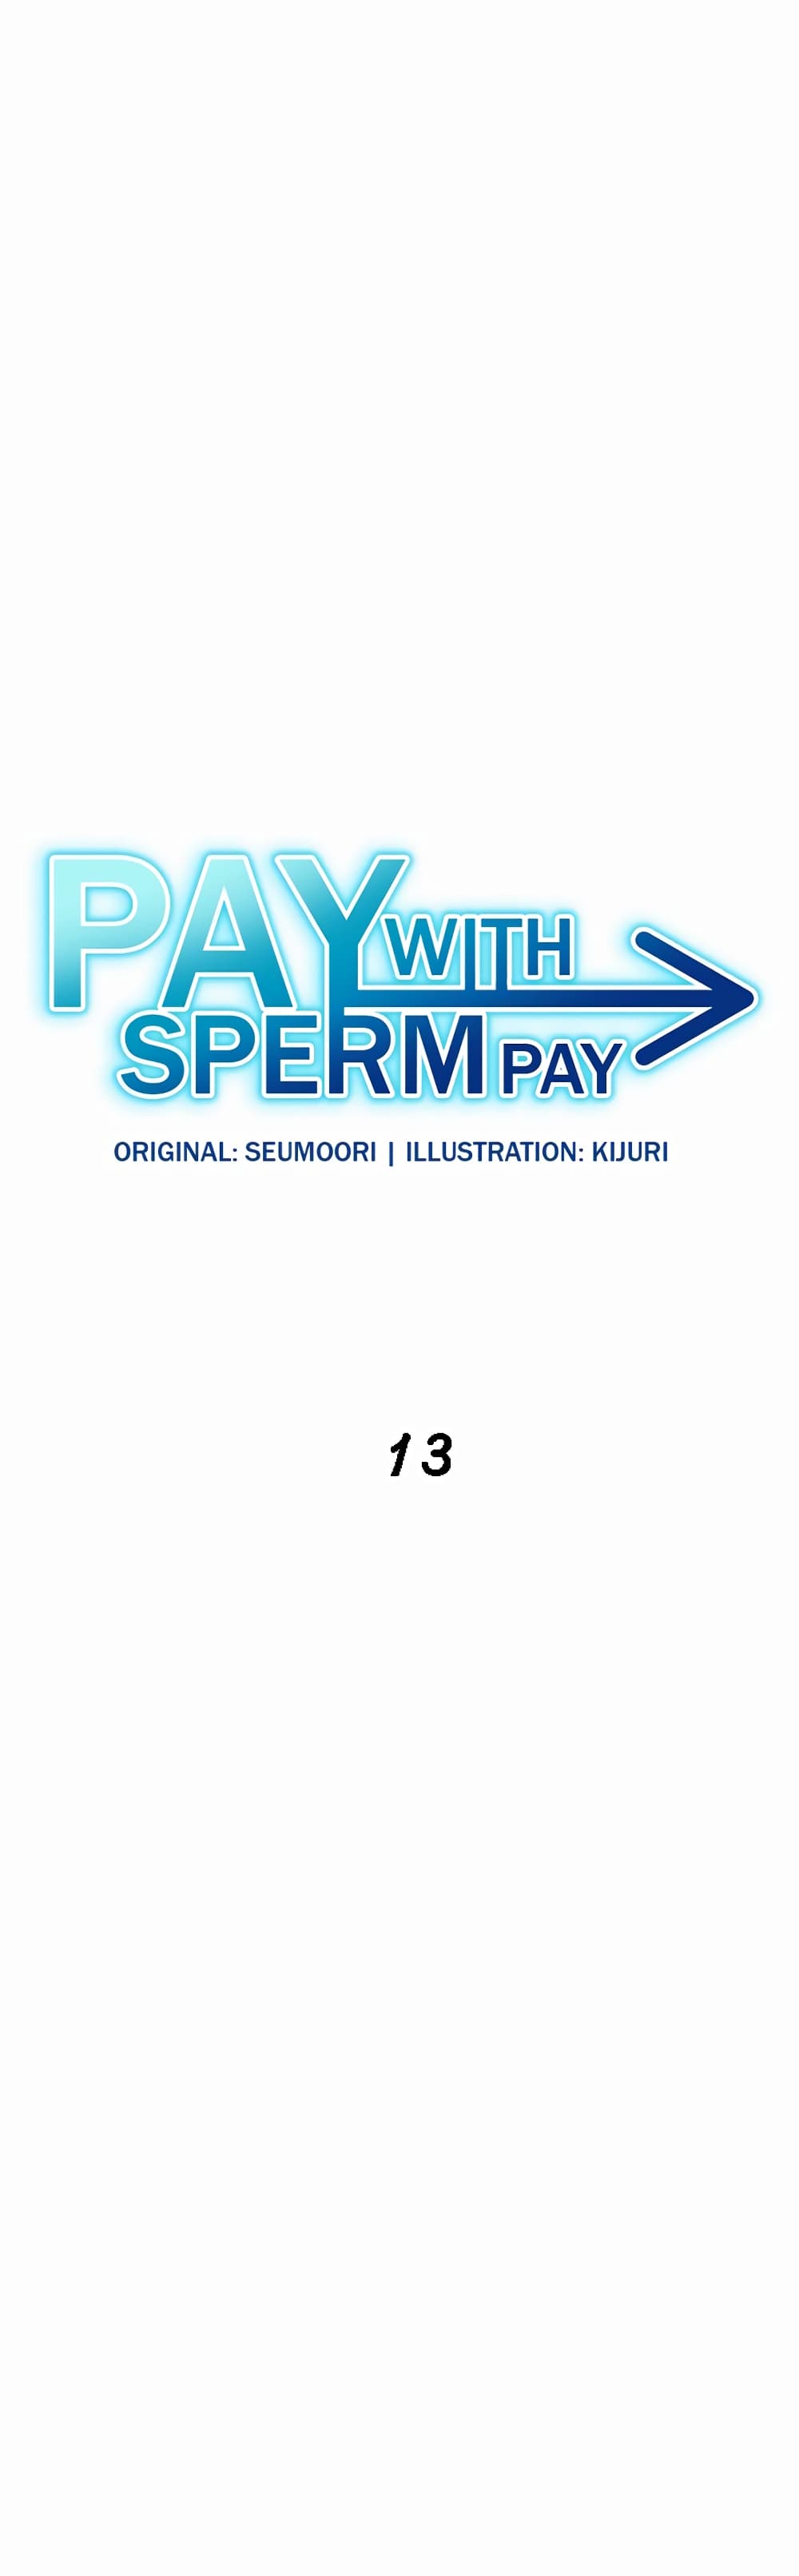 Pay with Sperm Pay 13 (1)